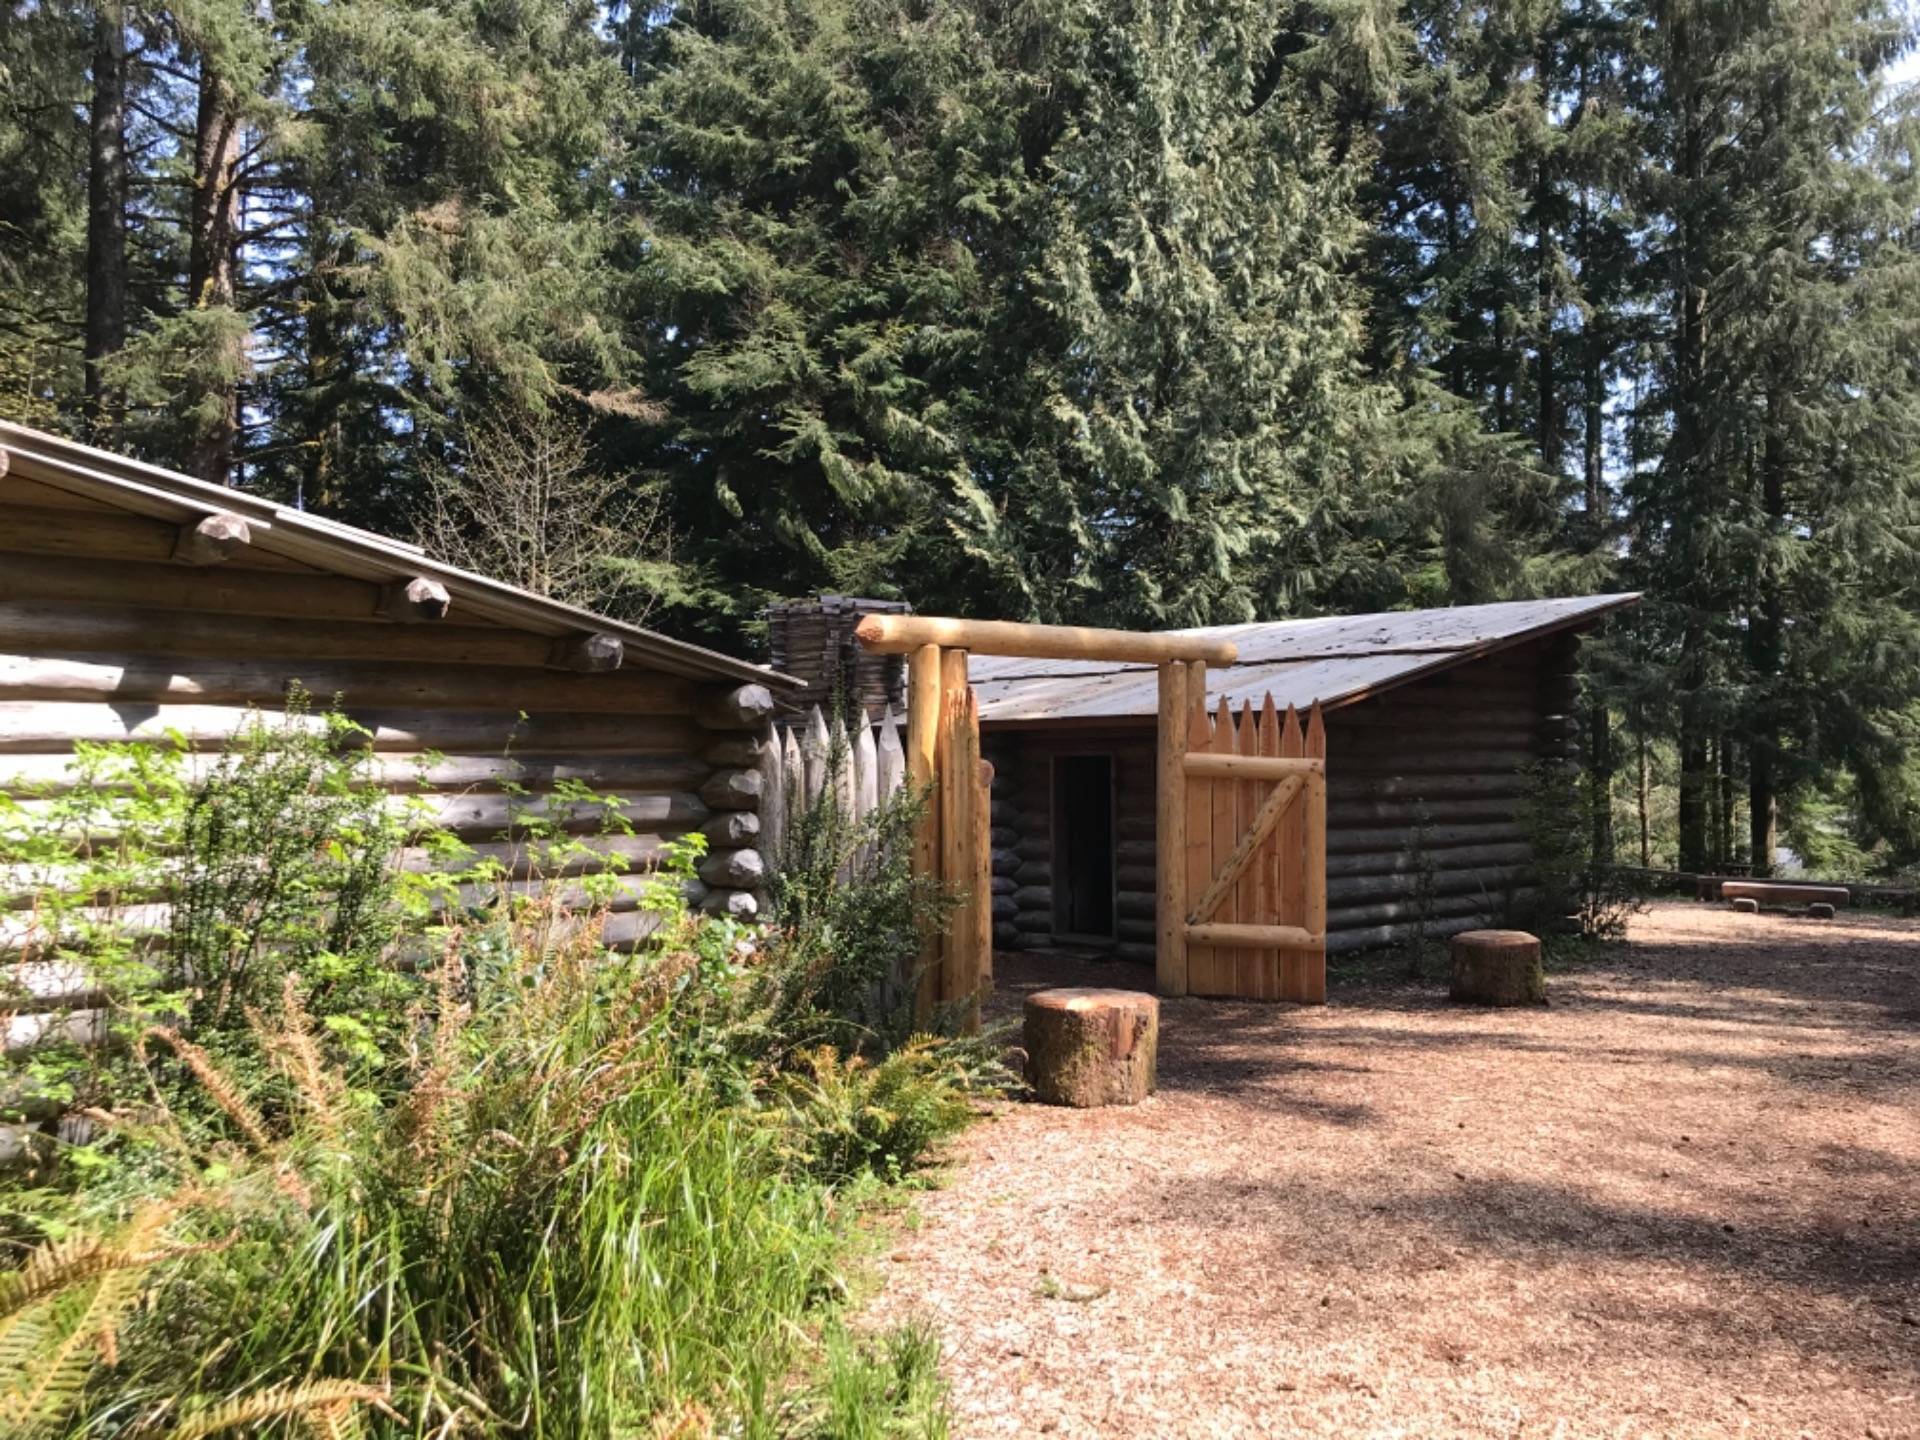 A replica of Fort Clatsop in Lewis and Clark National Historic Park.